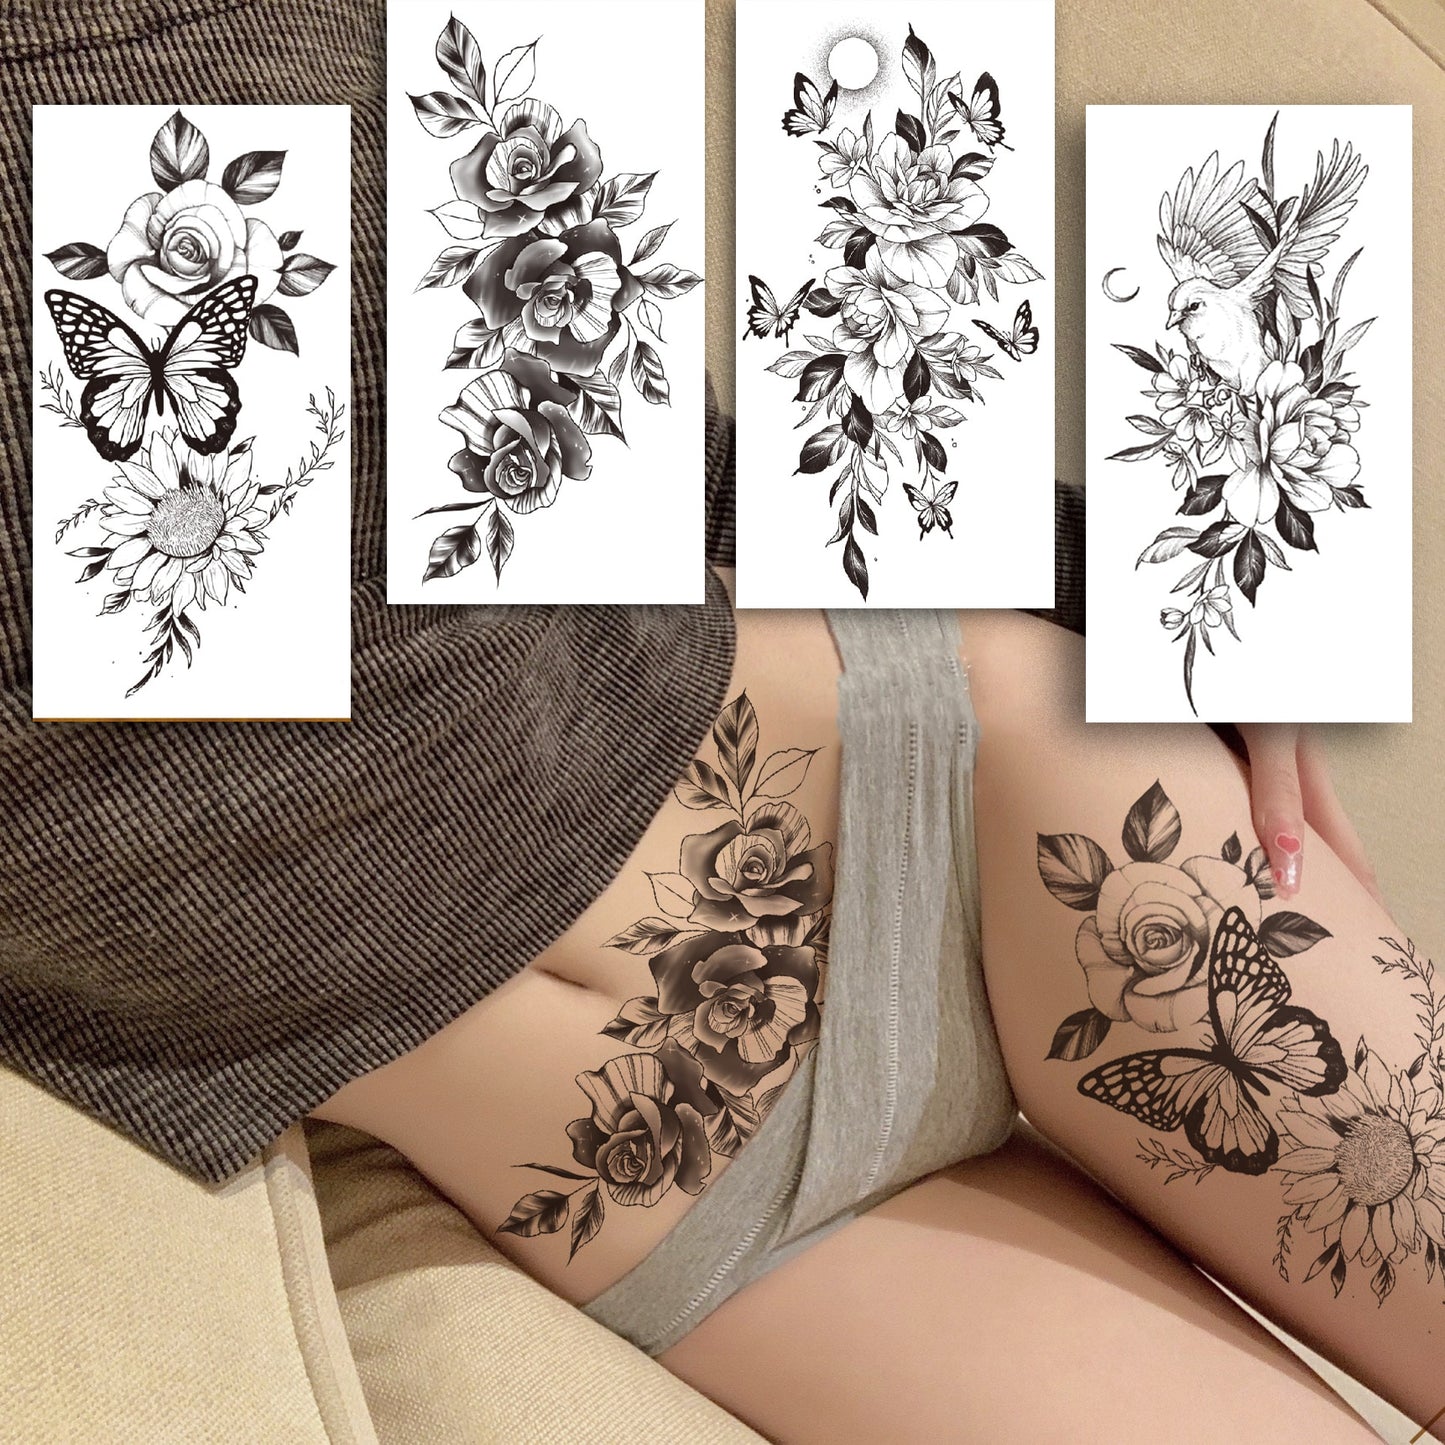 Qfdian gifts for women hot sale new Waterproof Temporary Tattoos Stickers Flowers Butterfly Tatto Flash Sexy Fake Tattoo Arm Body Chest Tatto Art for Women and Girl